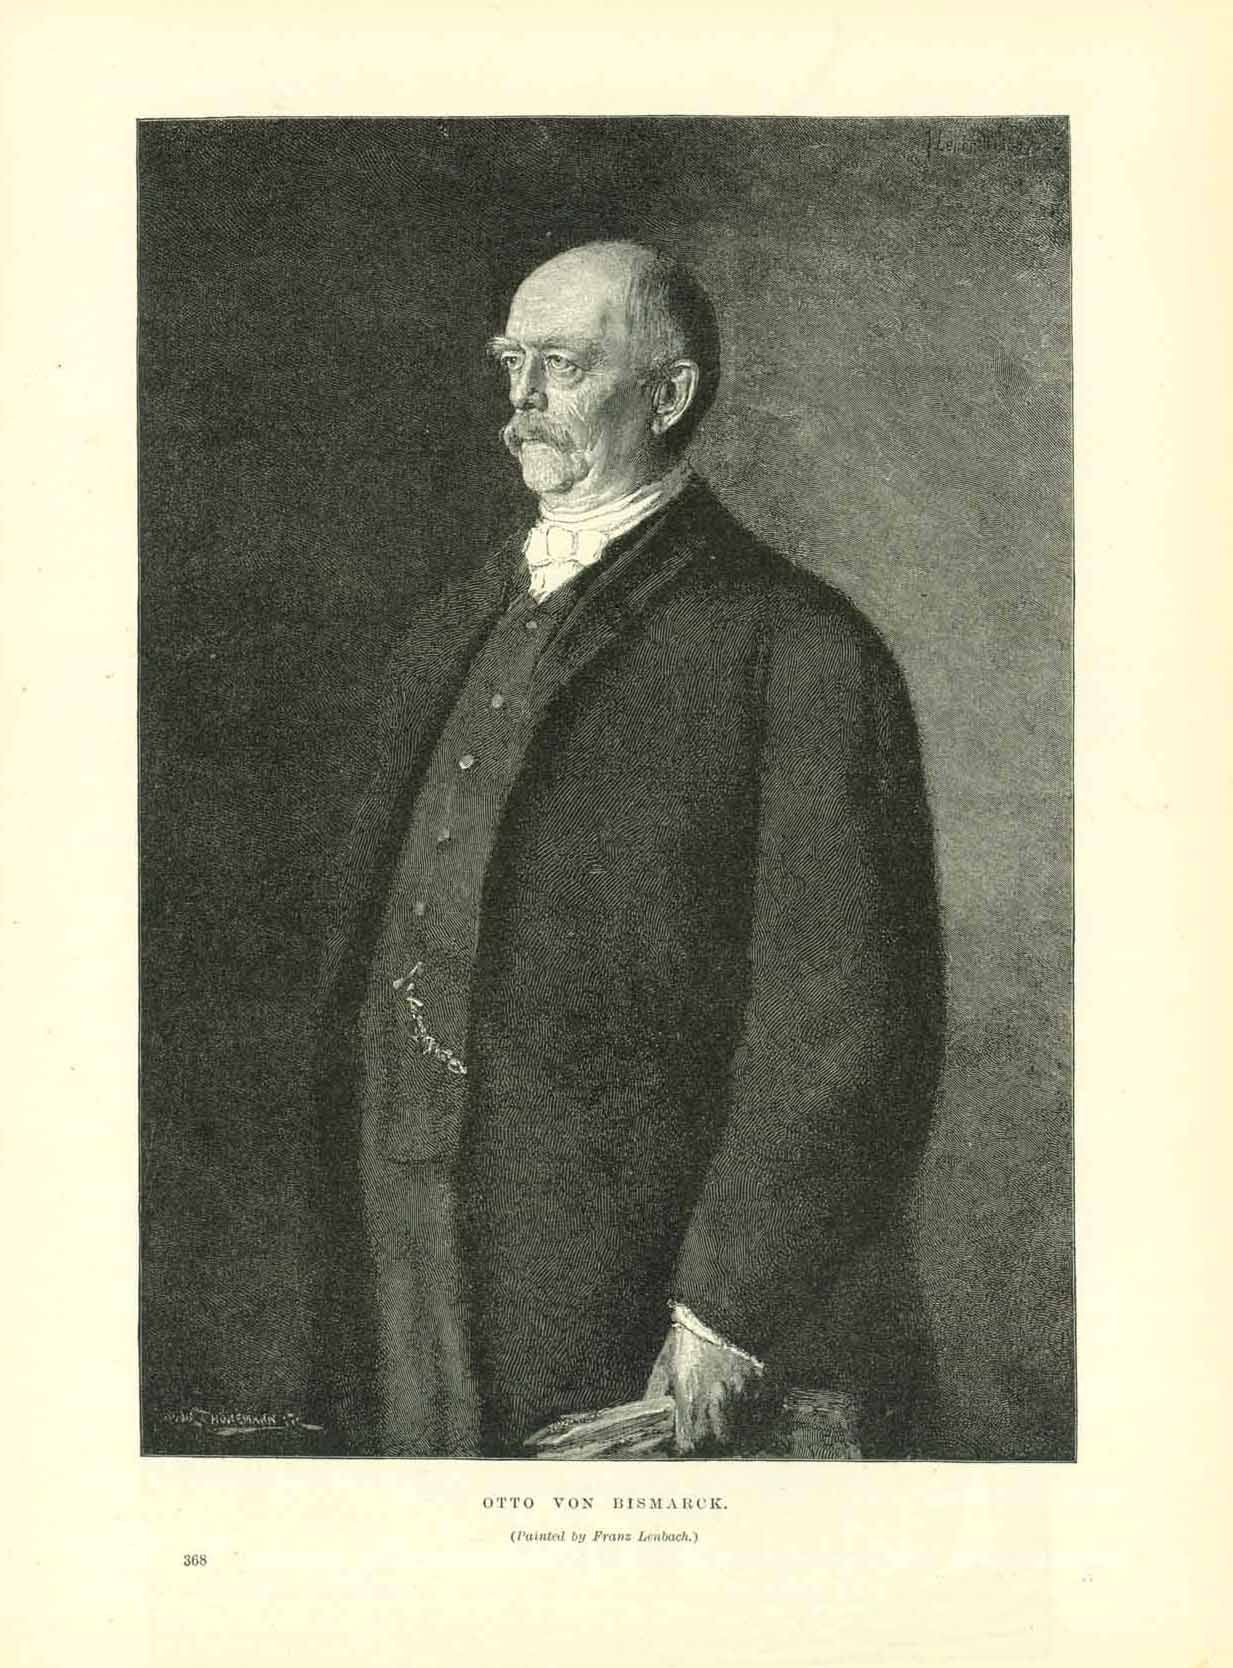 "Otto von Bismarck"  Wood engraving made after a painting by Franz Lenbach. On the reverse side is text about Lenbach and his paintings.